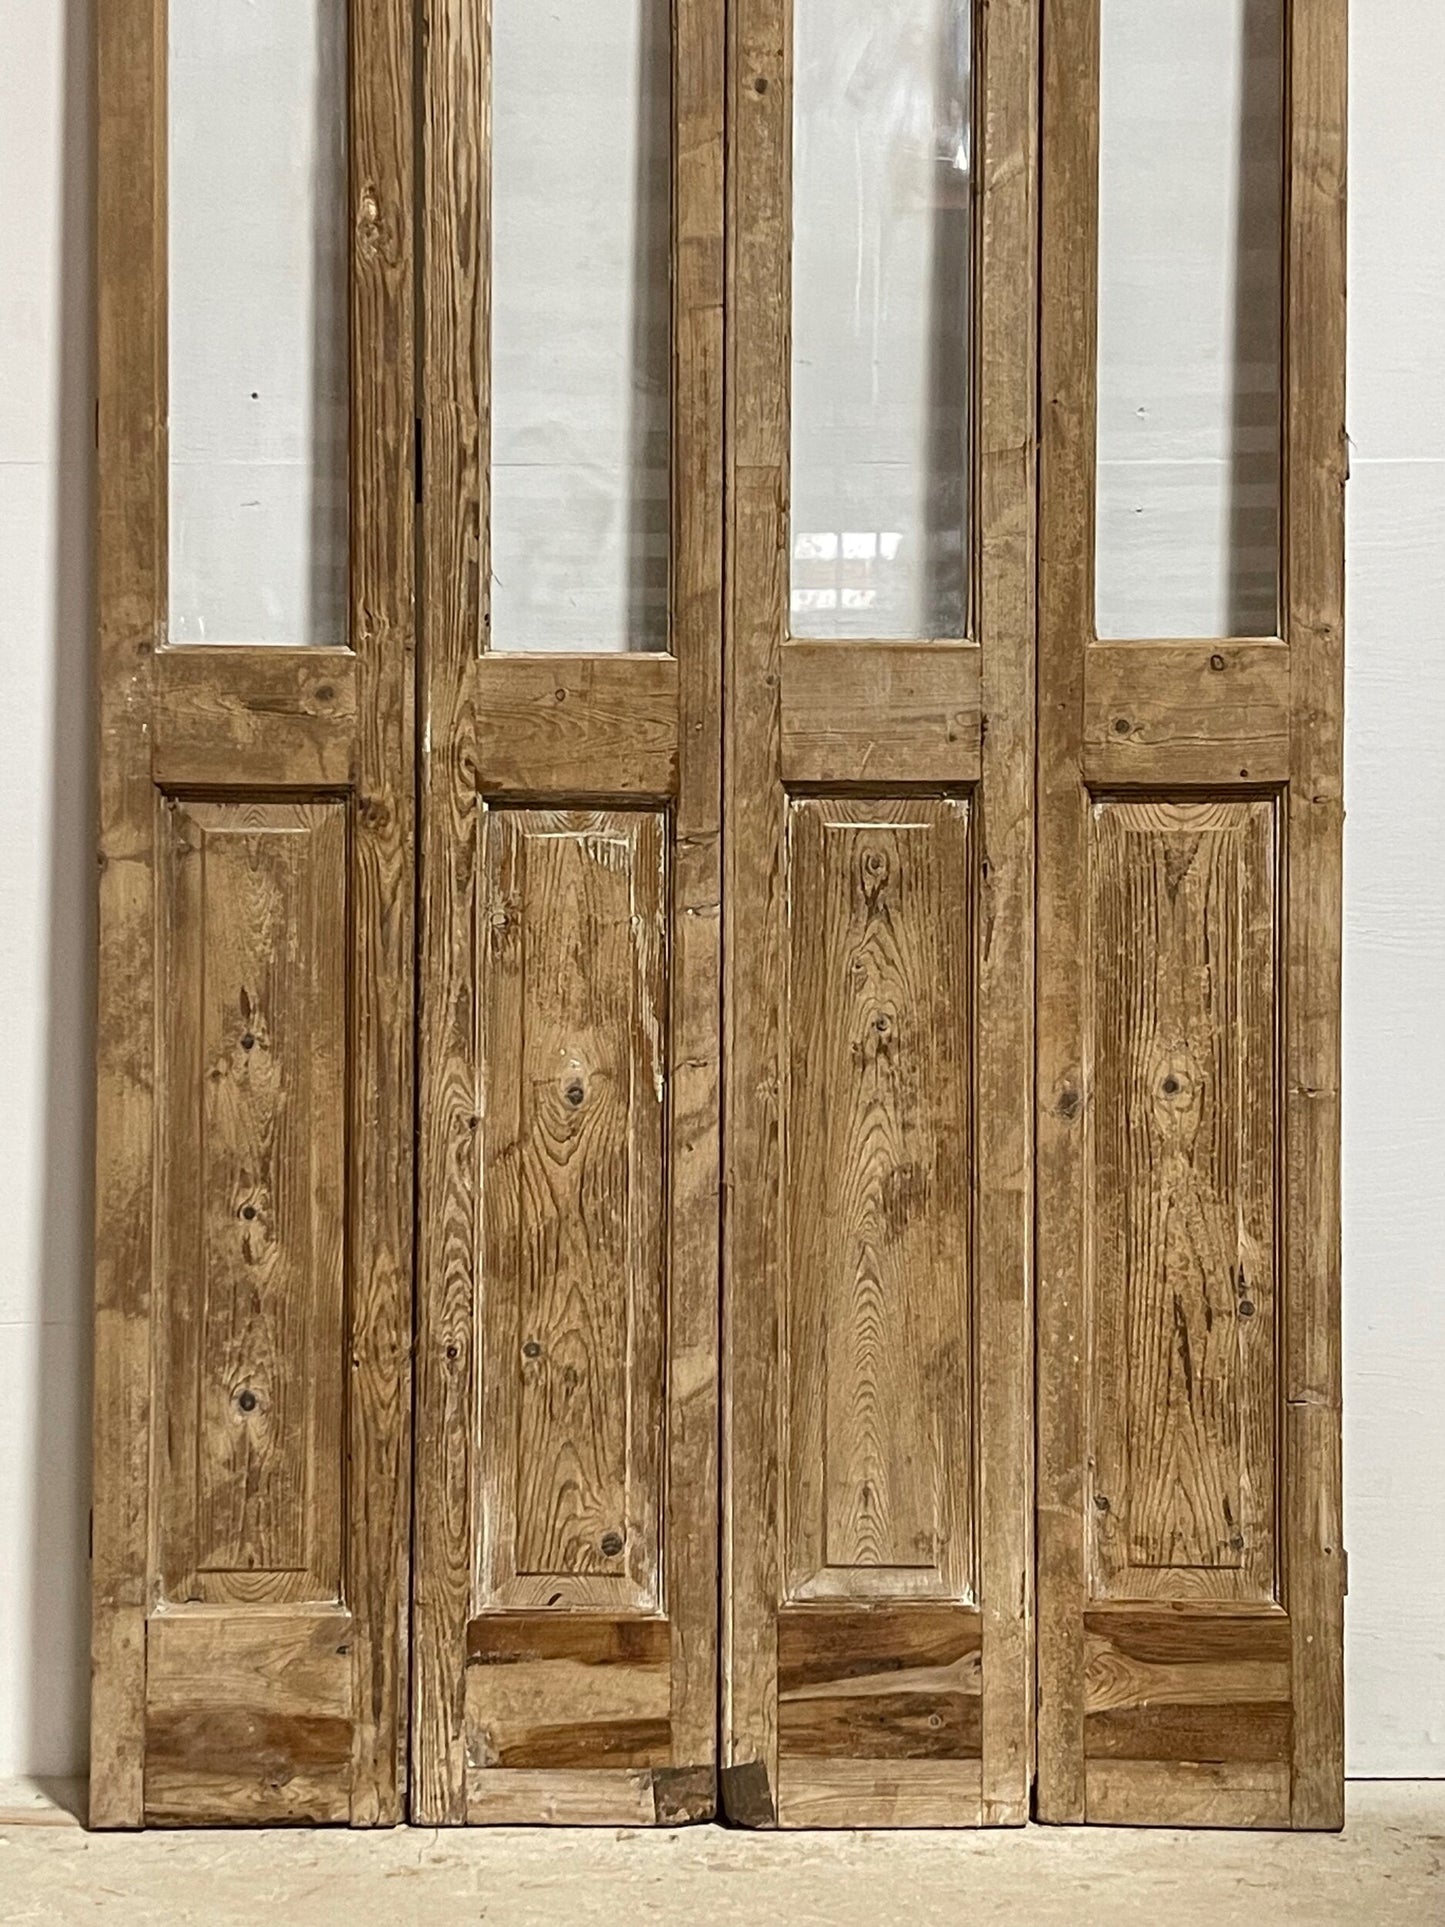 Antique French doors with glass (95.25x43) H0246s